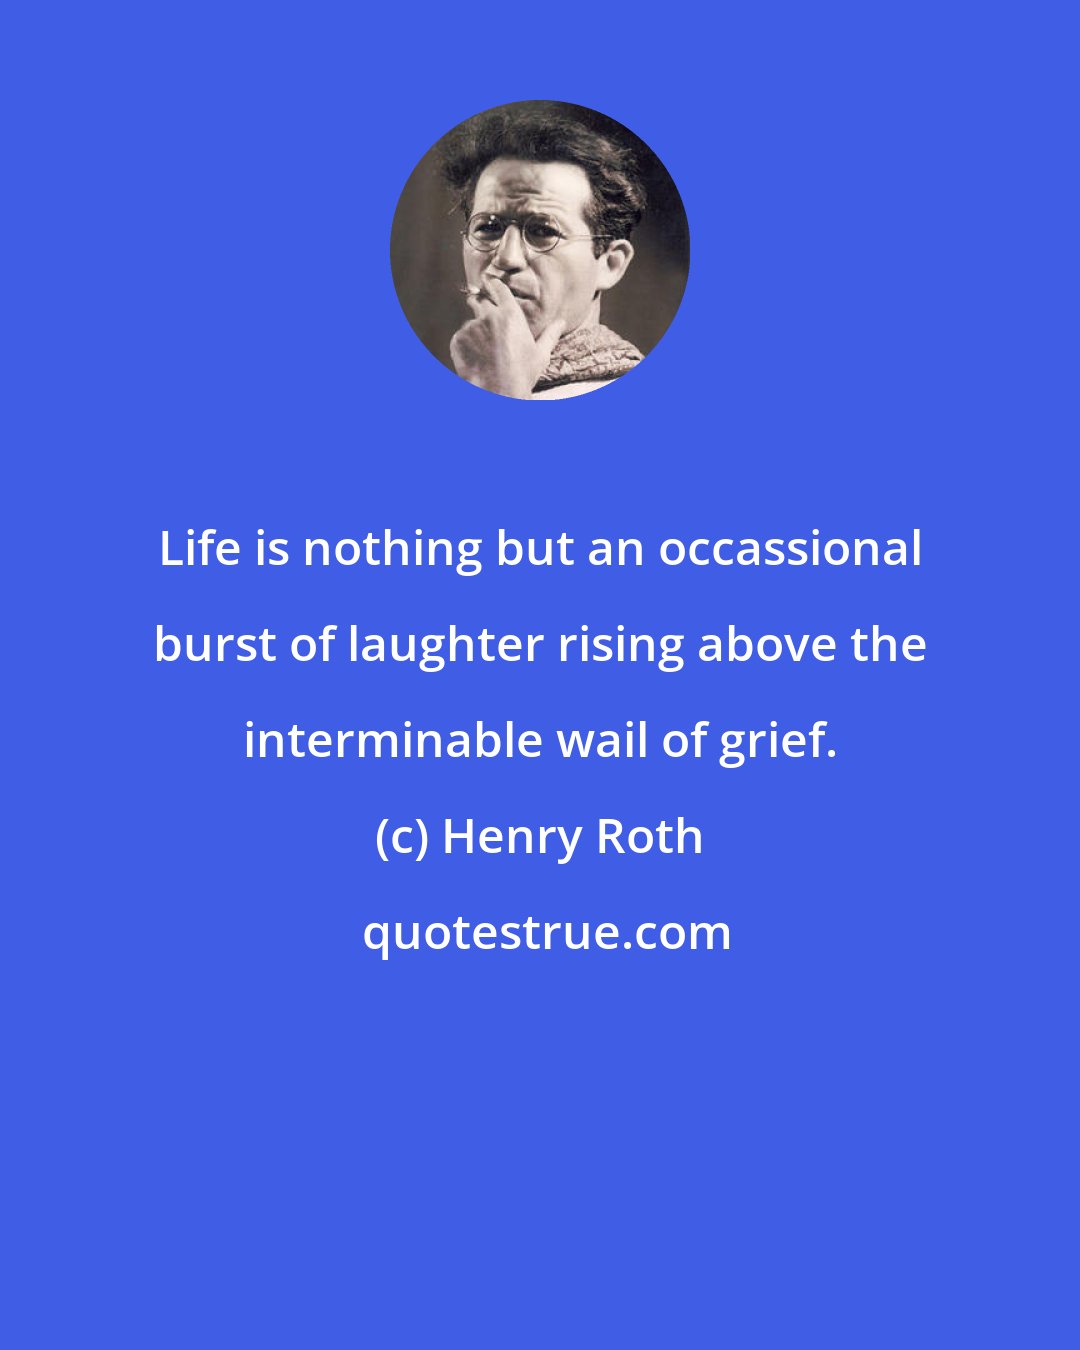 Henry Roth: Life is nothing but an occassional burst of laughter rising above the interminable wail of grief.